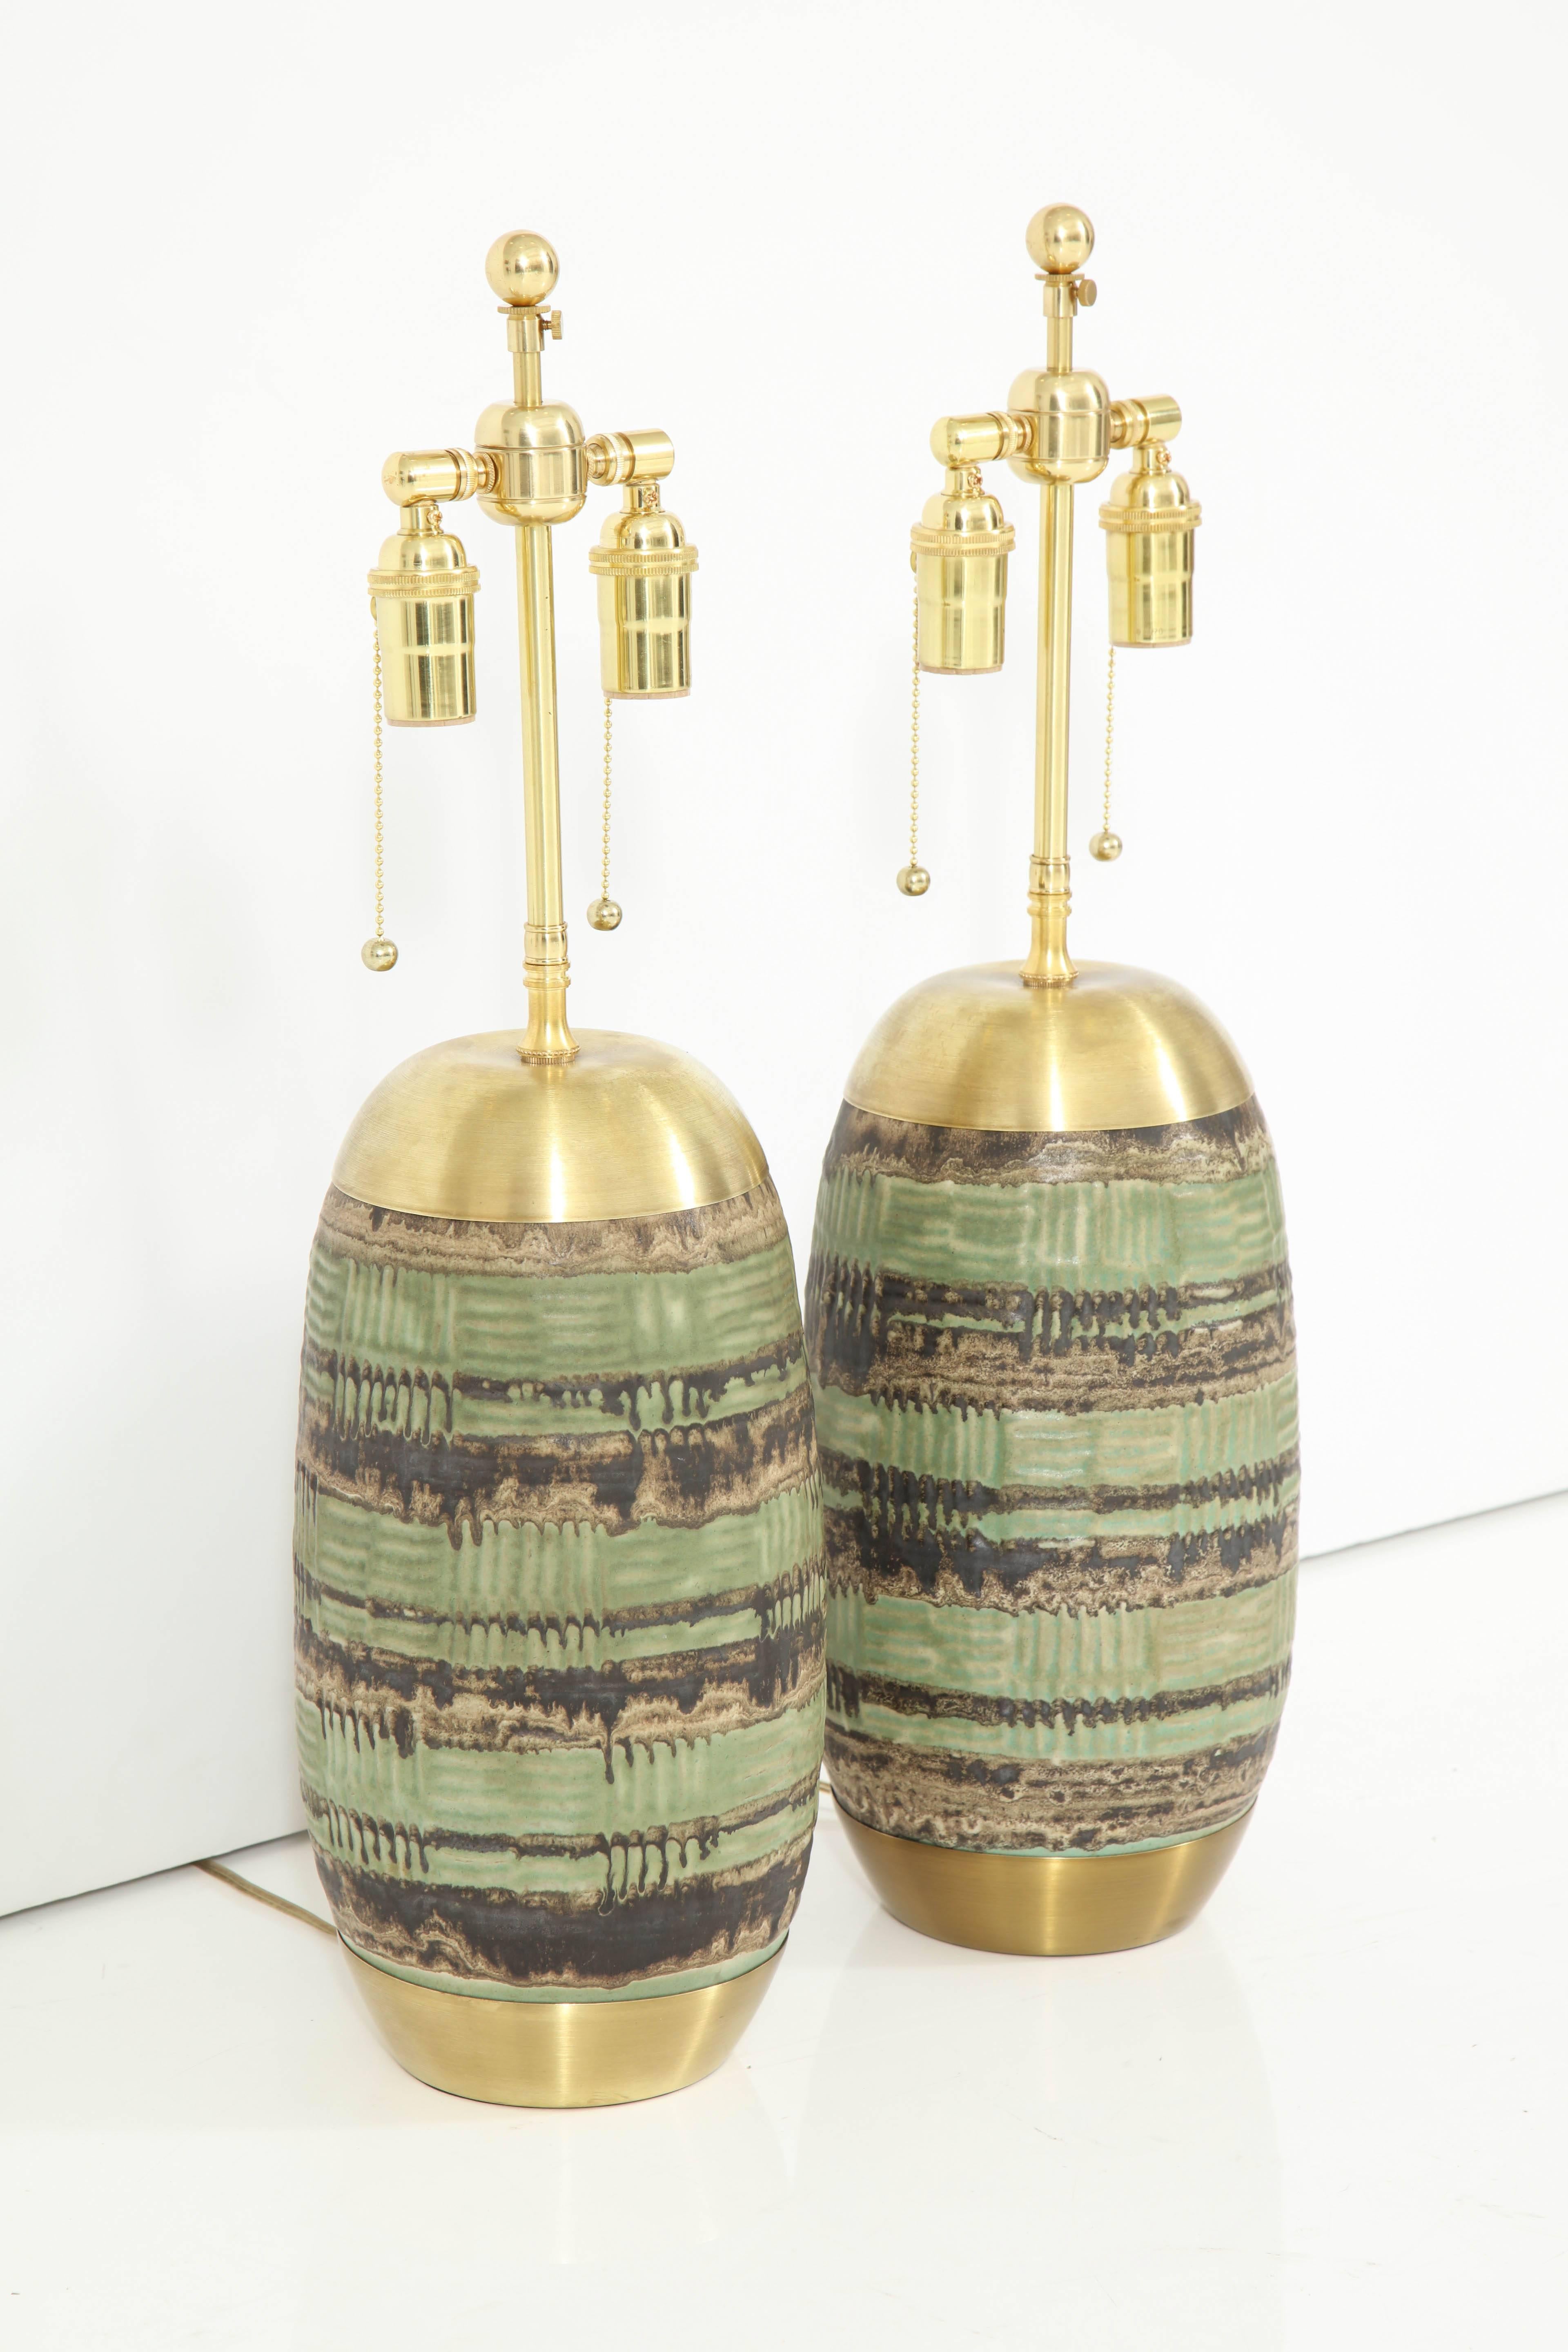 Pair of 1960s Italian ceramic lamps.
The lamp bodies have a nice green and earth tone glaze finish and are set in brass bases and they have been newly rewired for the US with polish brass double clusters that take standard light bulbs.